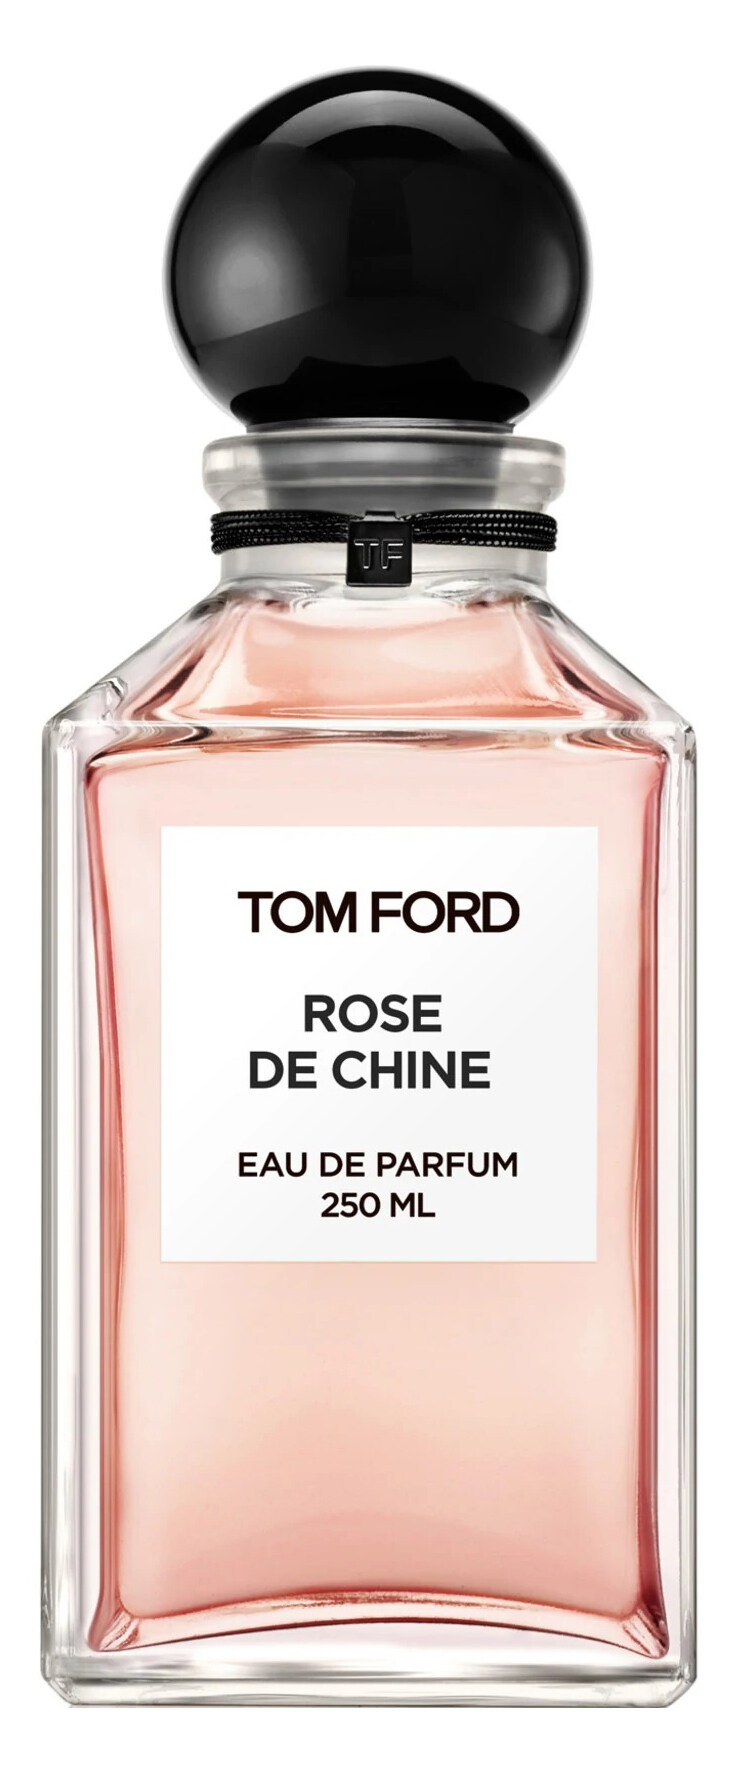 Rose de Chine by Tom Ford » Reviews & Perfume Facts